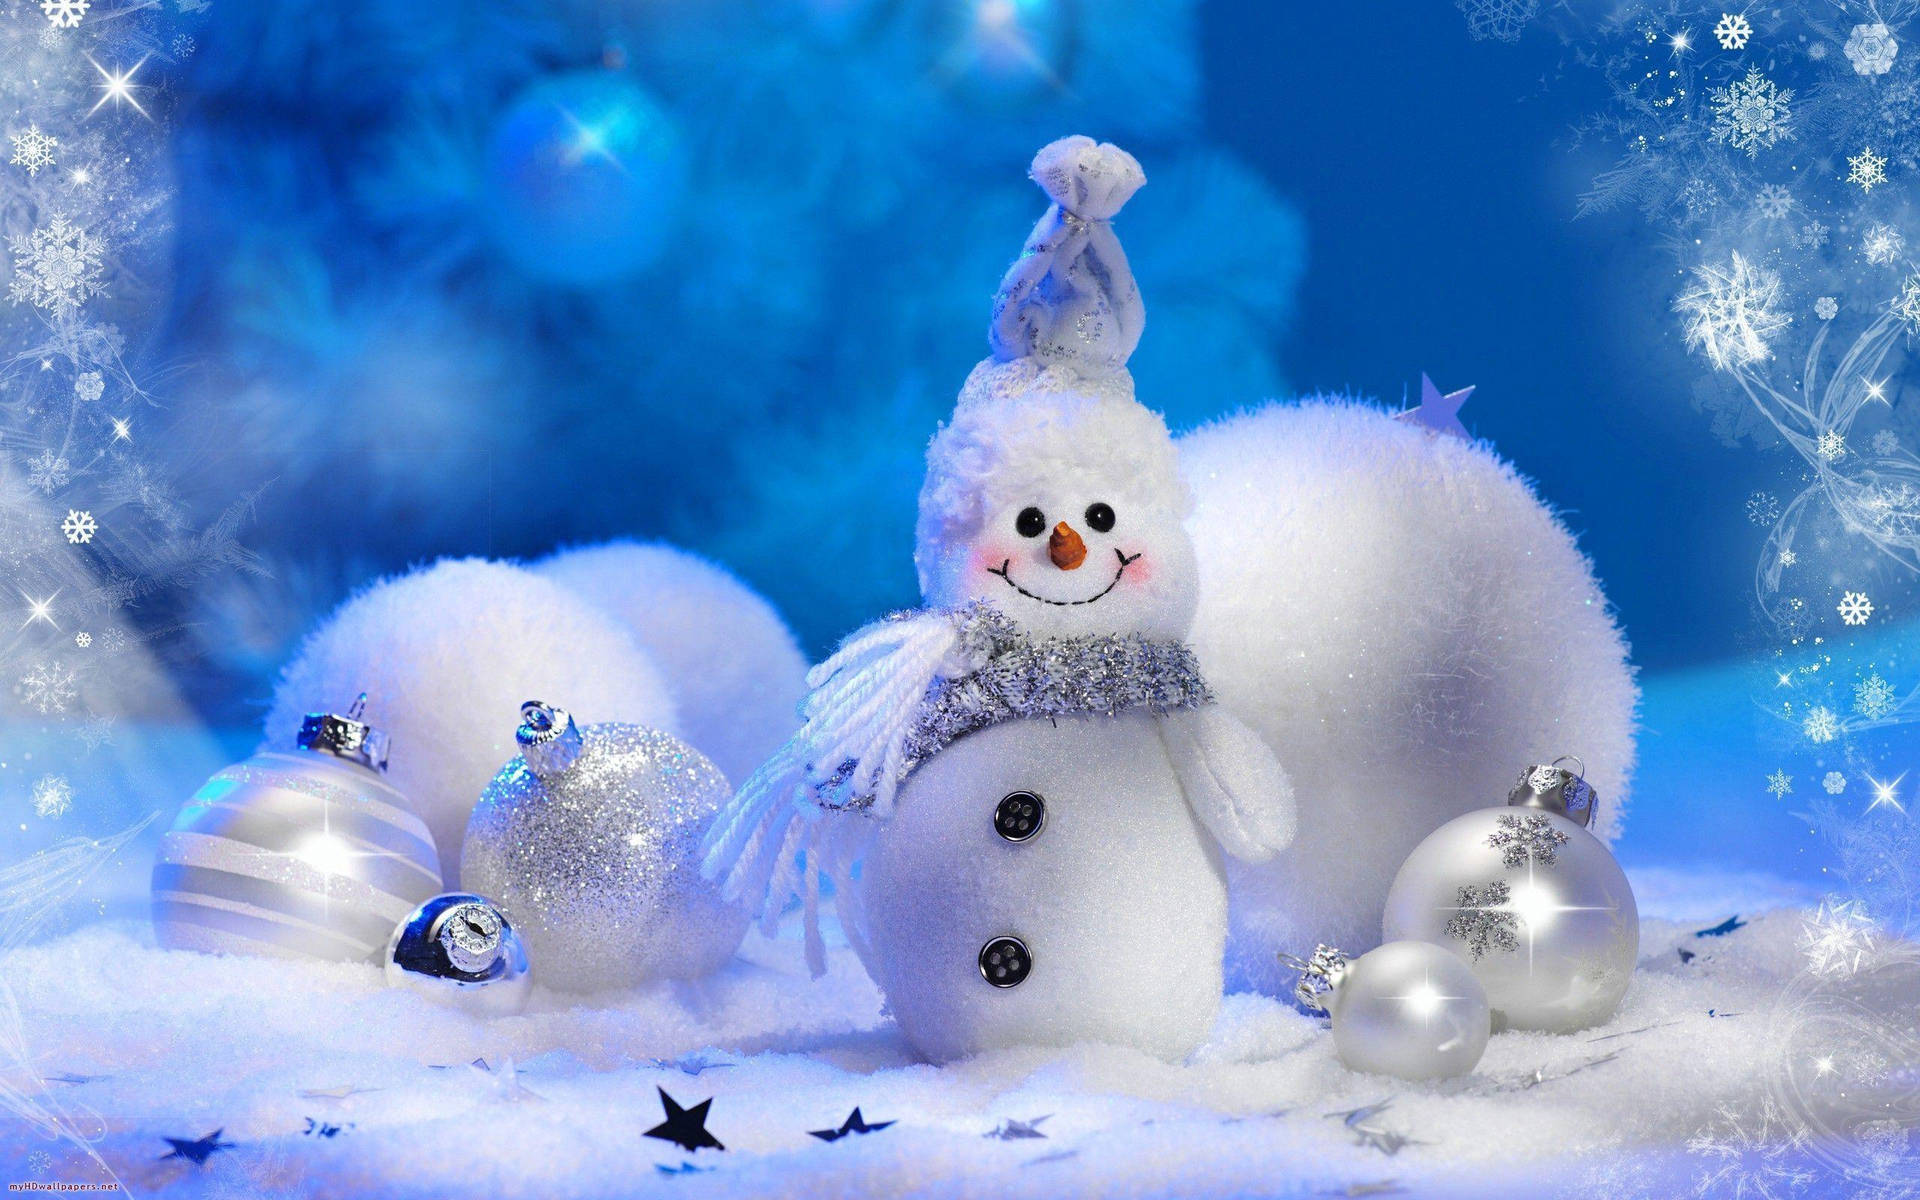 Pretty White Christmas With Snowman Background